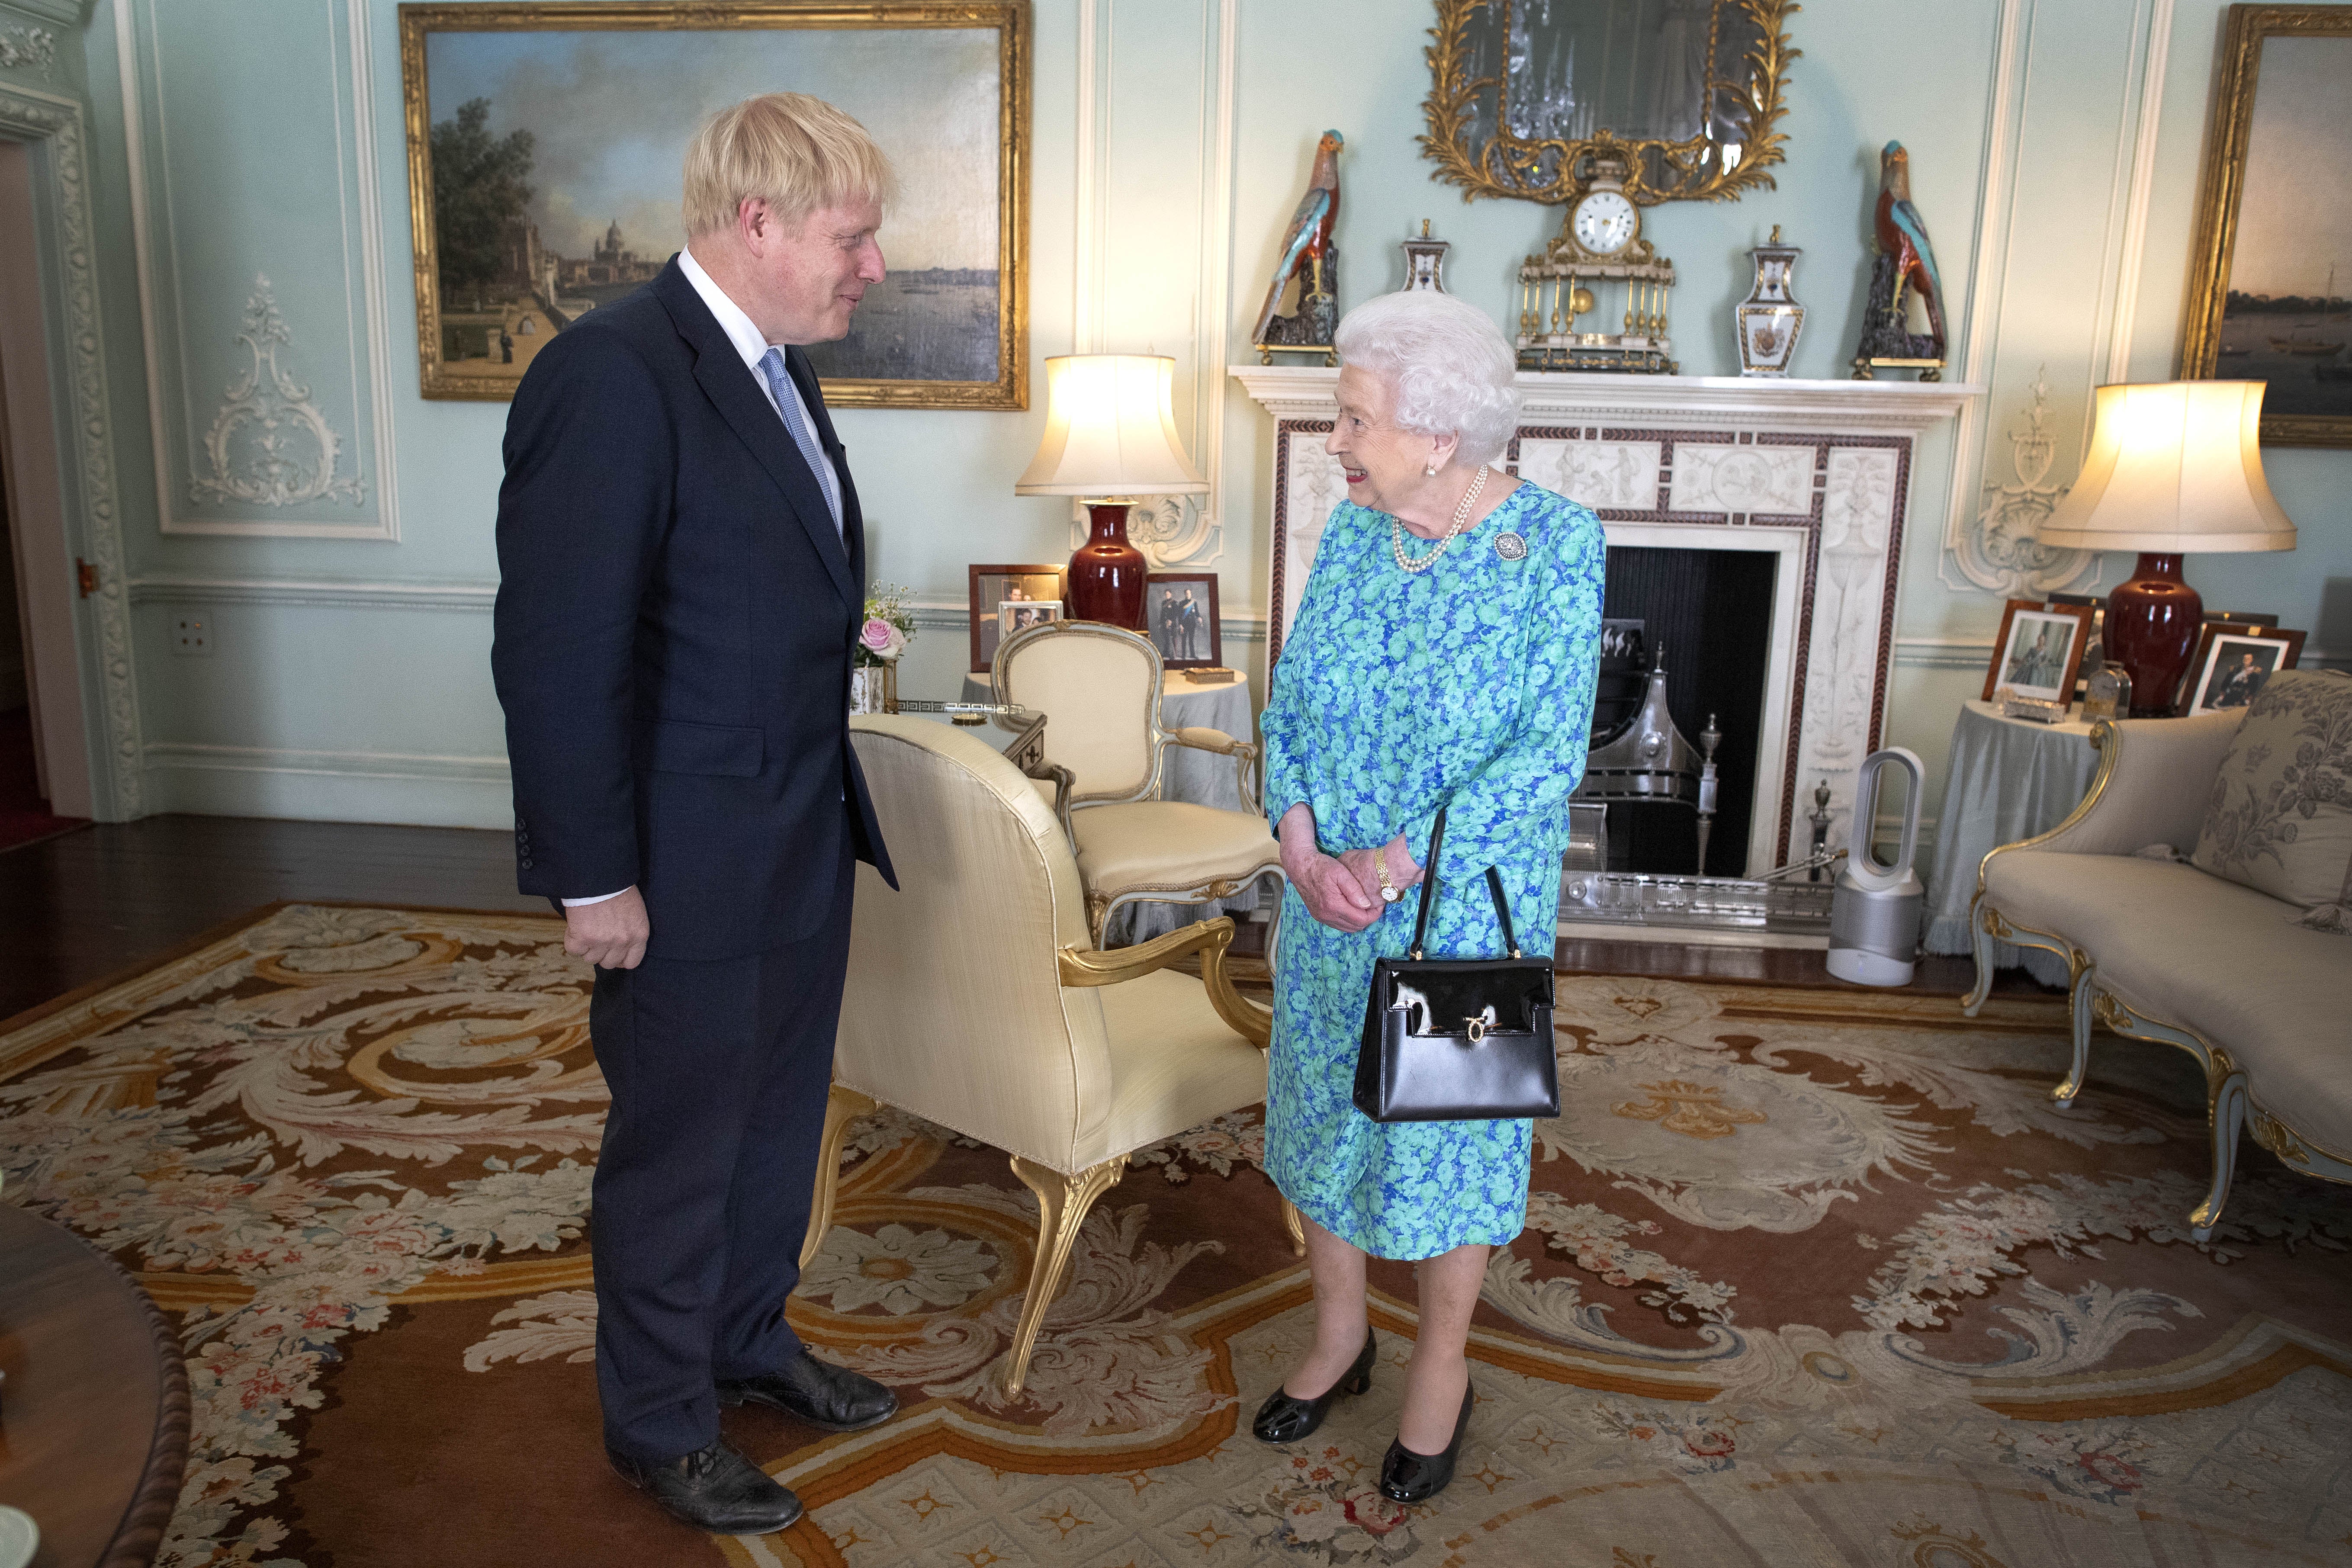 The Queen welcoming newly elected leader of the Conservative party Boris Johnson during an audience in Buckingham Palace, London (Victoria Jones/PA)